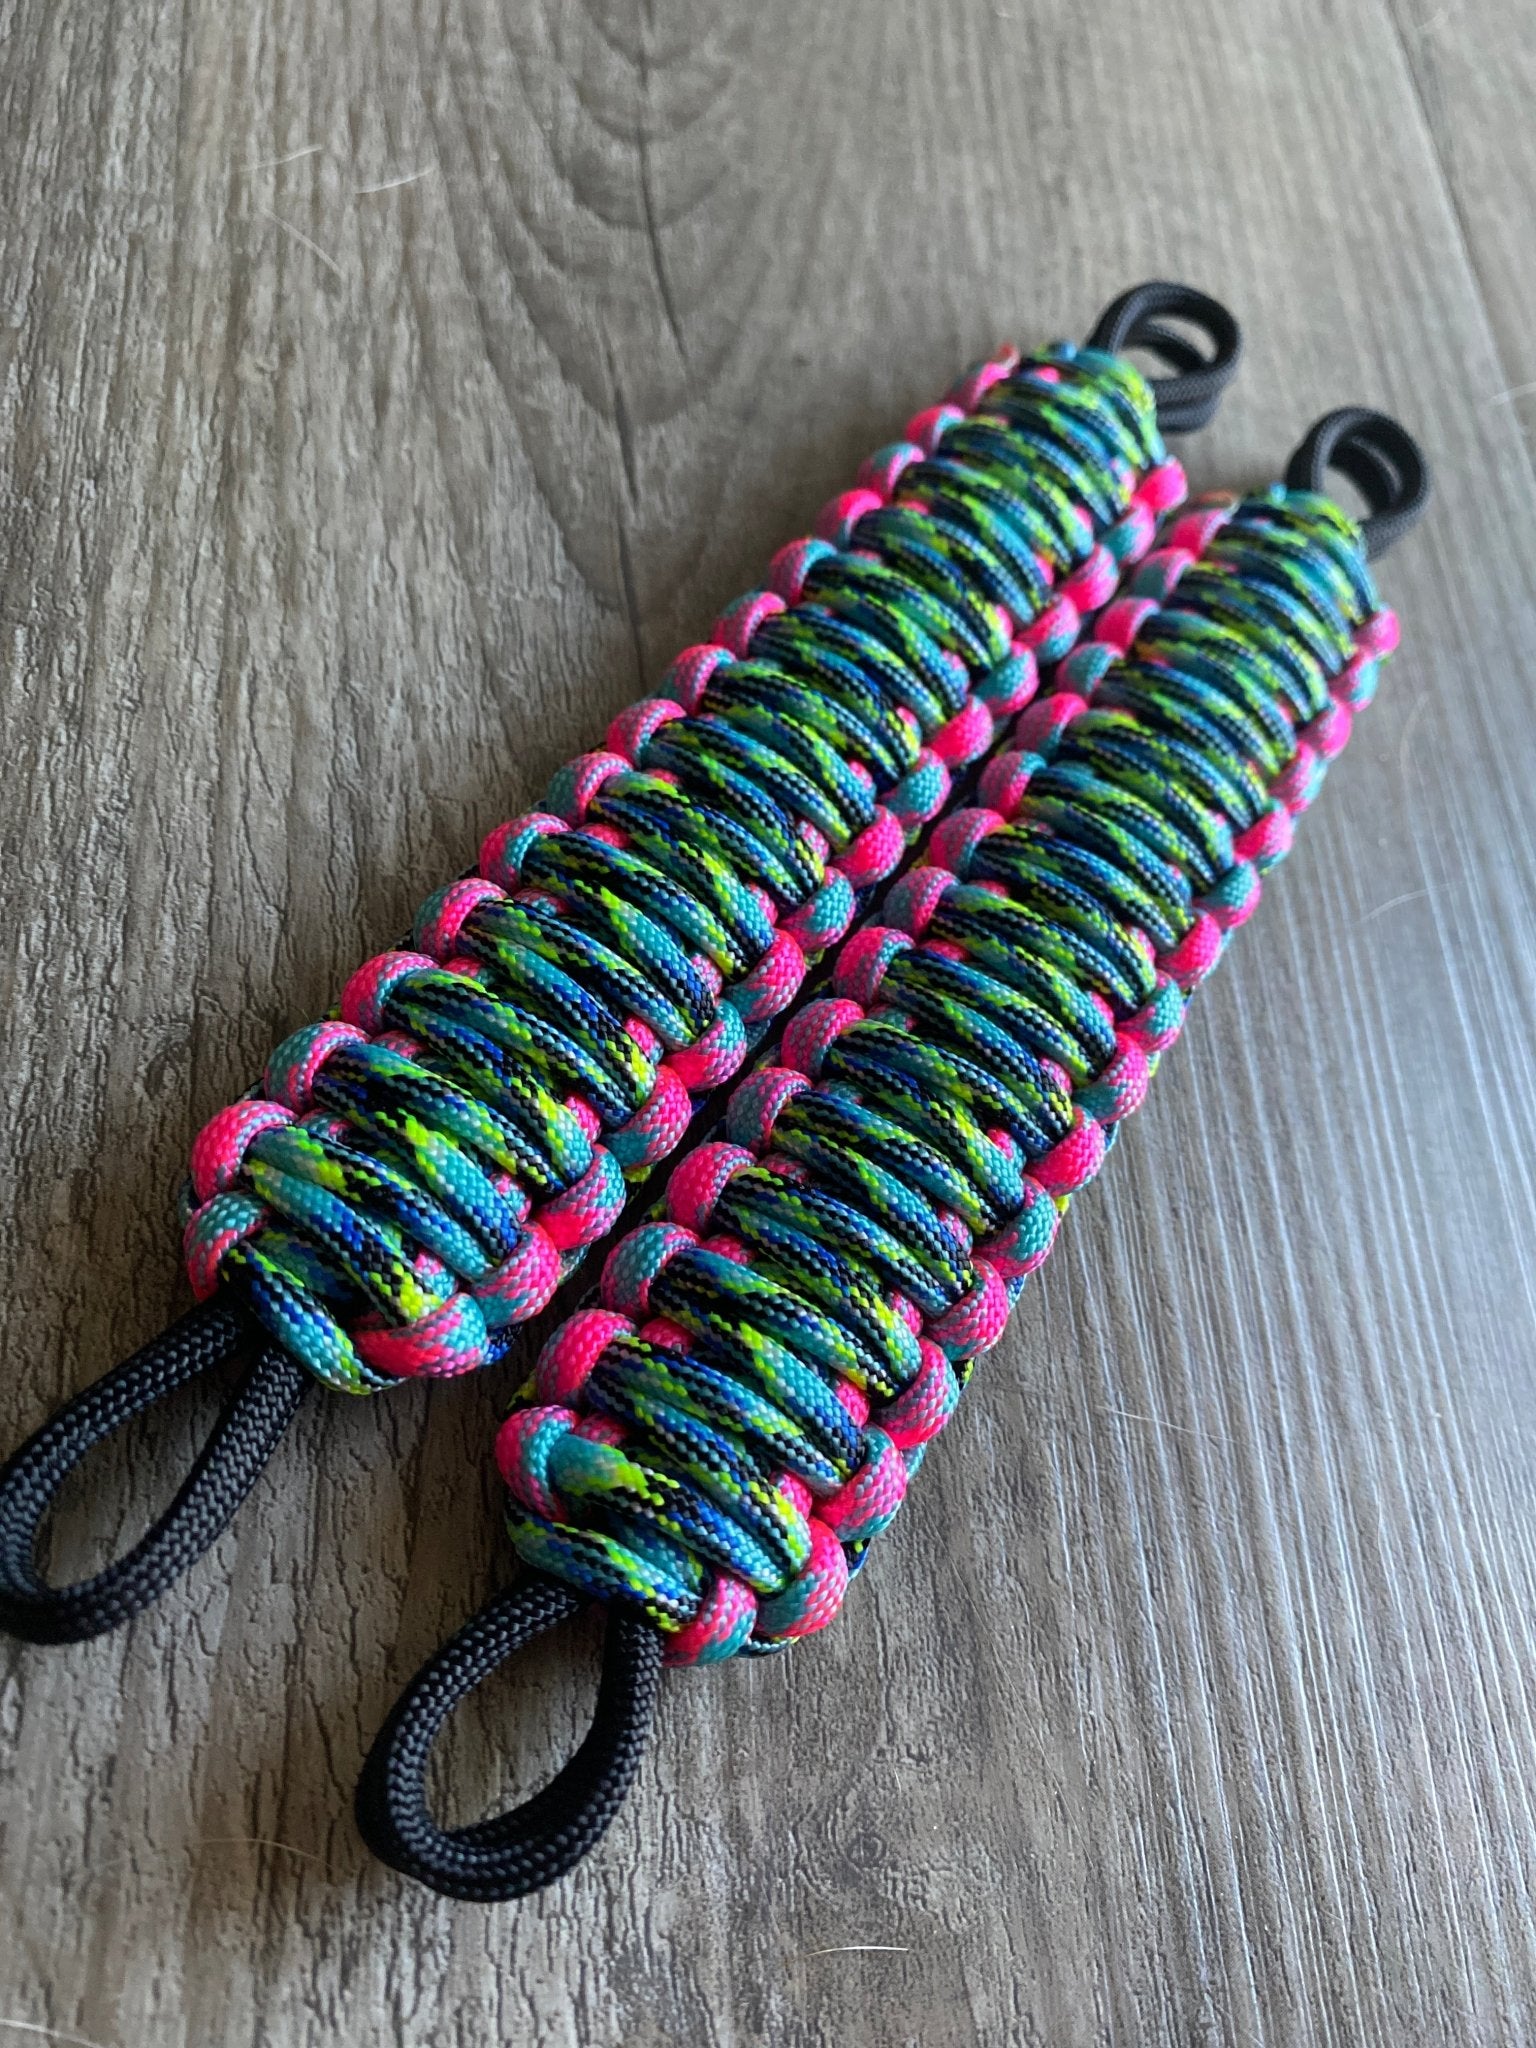 Krawler Grips Oceans On Fire and Cotton Candy Paracord - Krawlergrips